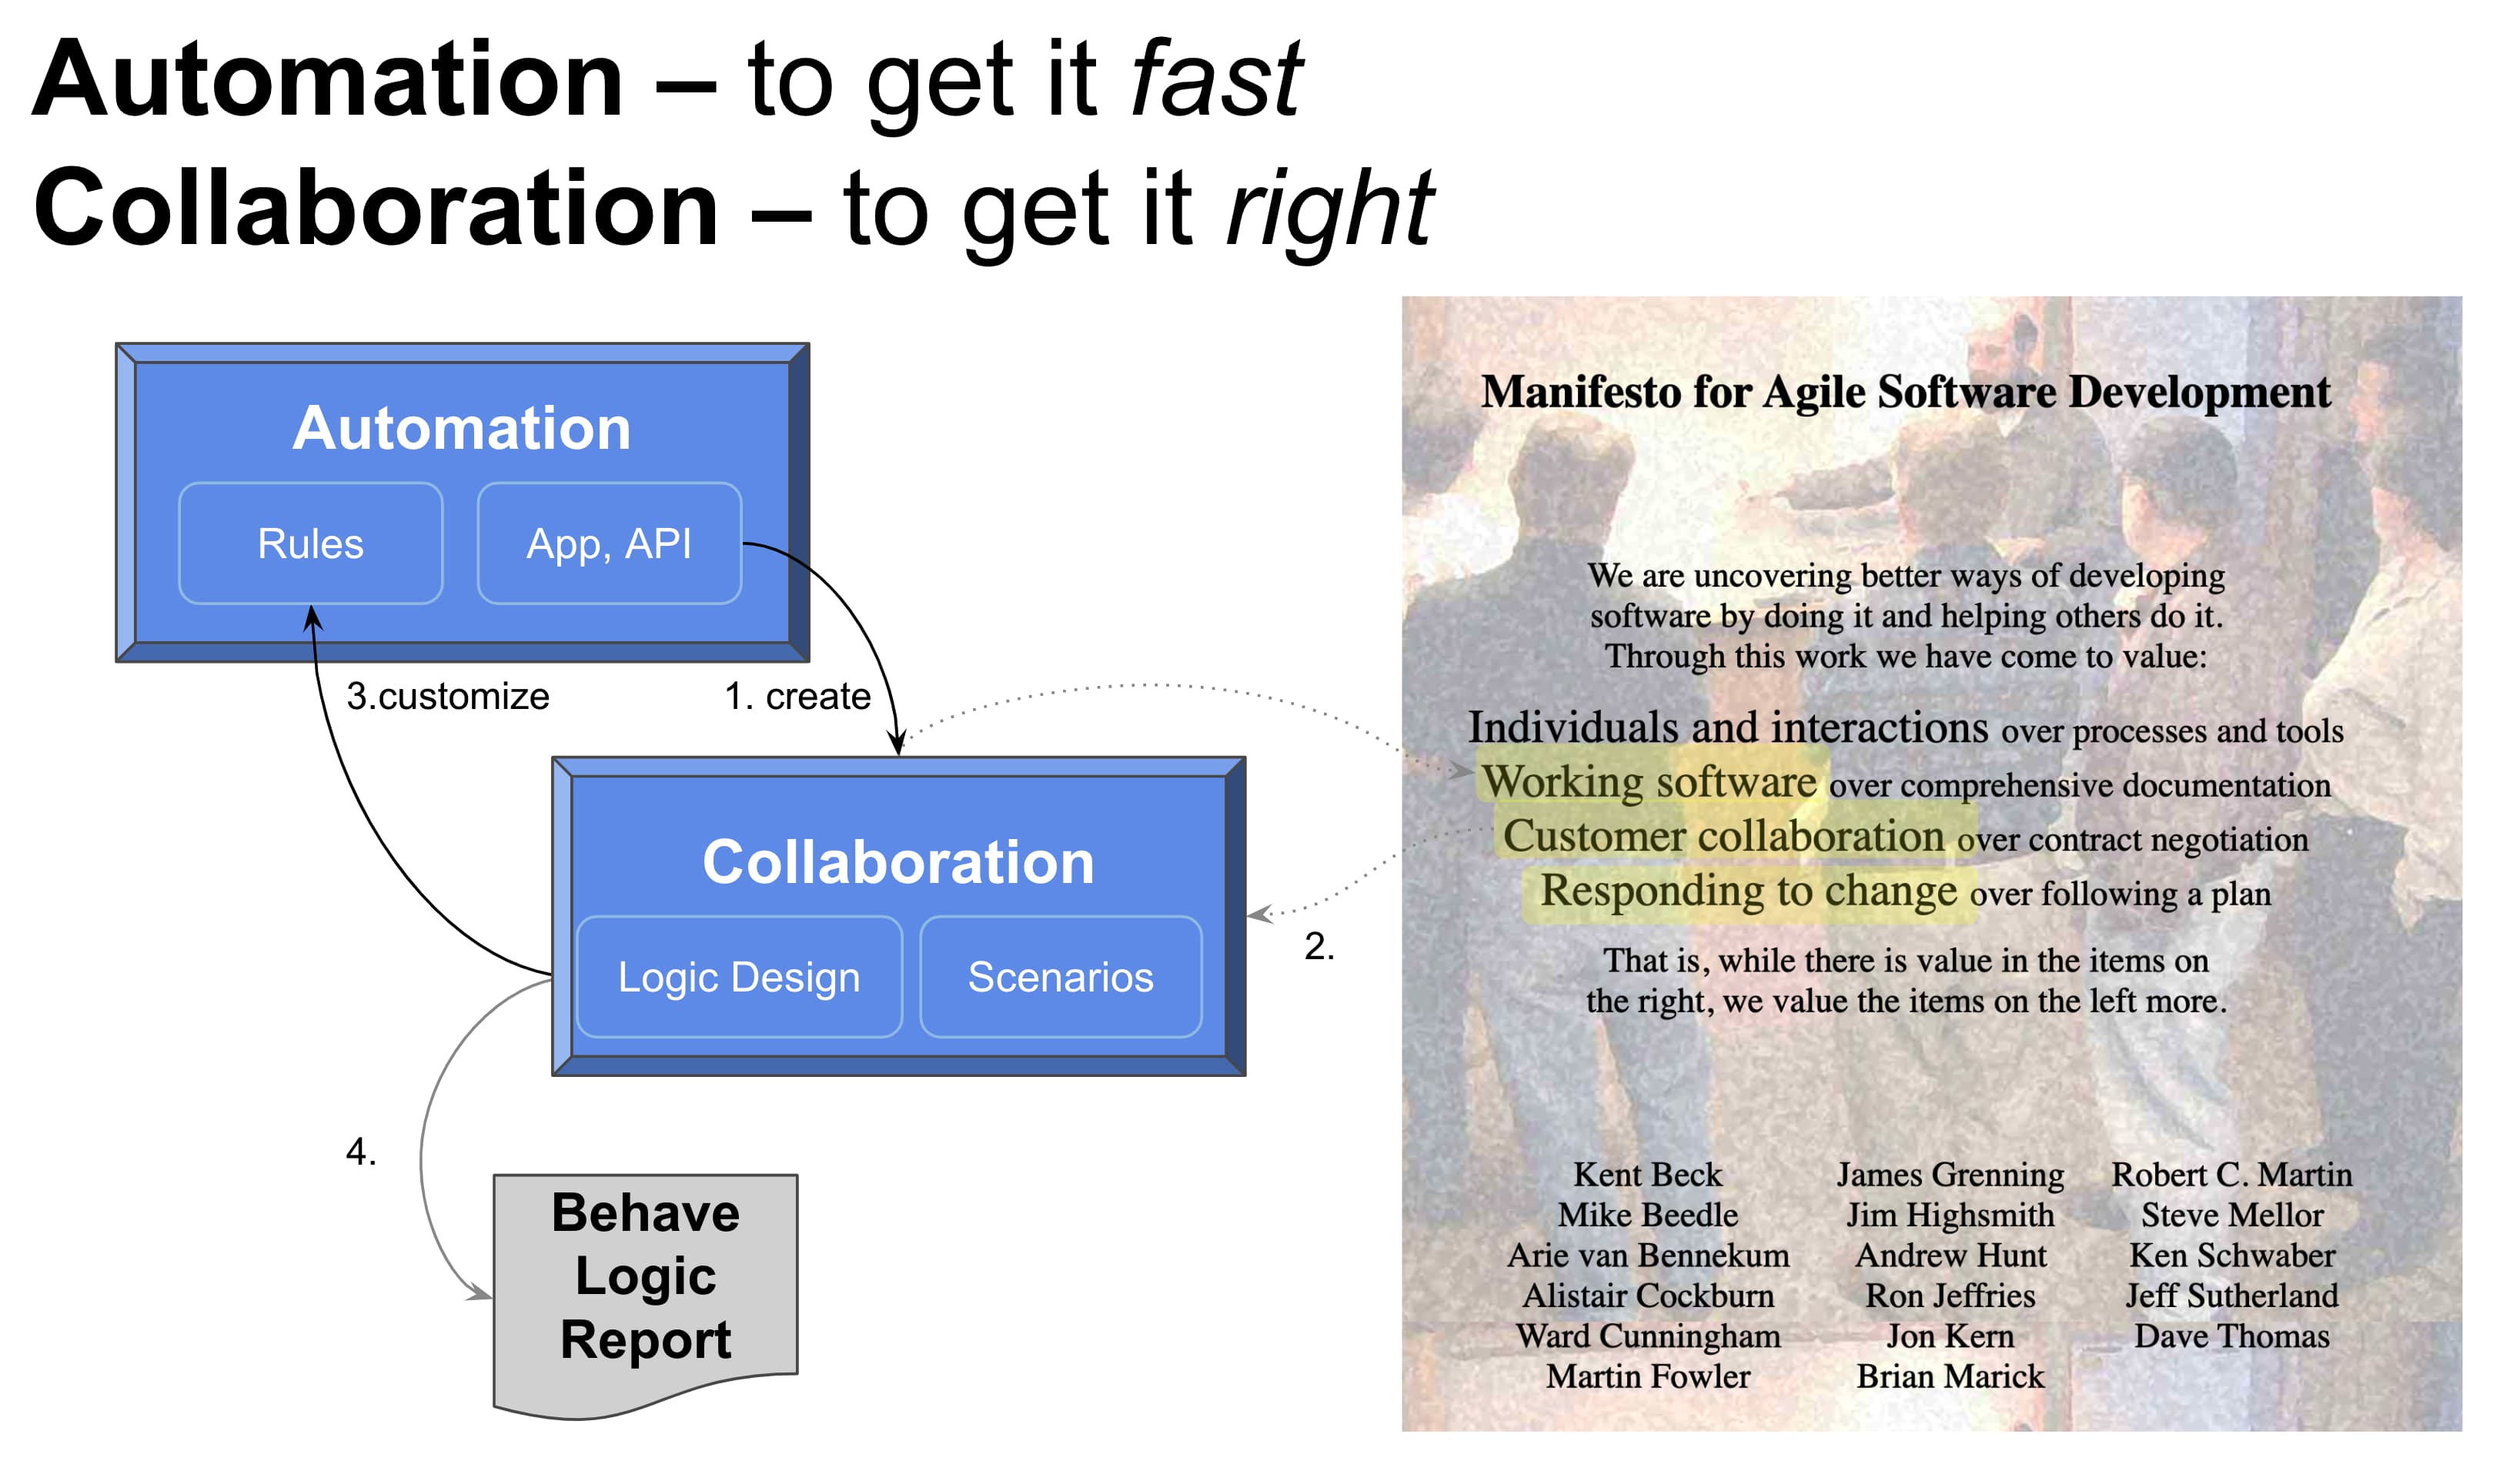 Automation to Get It Fast;  Collaboration to Get It Right